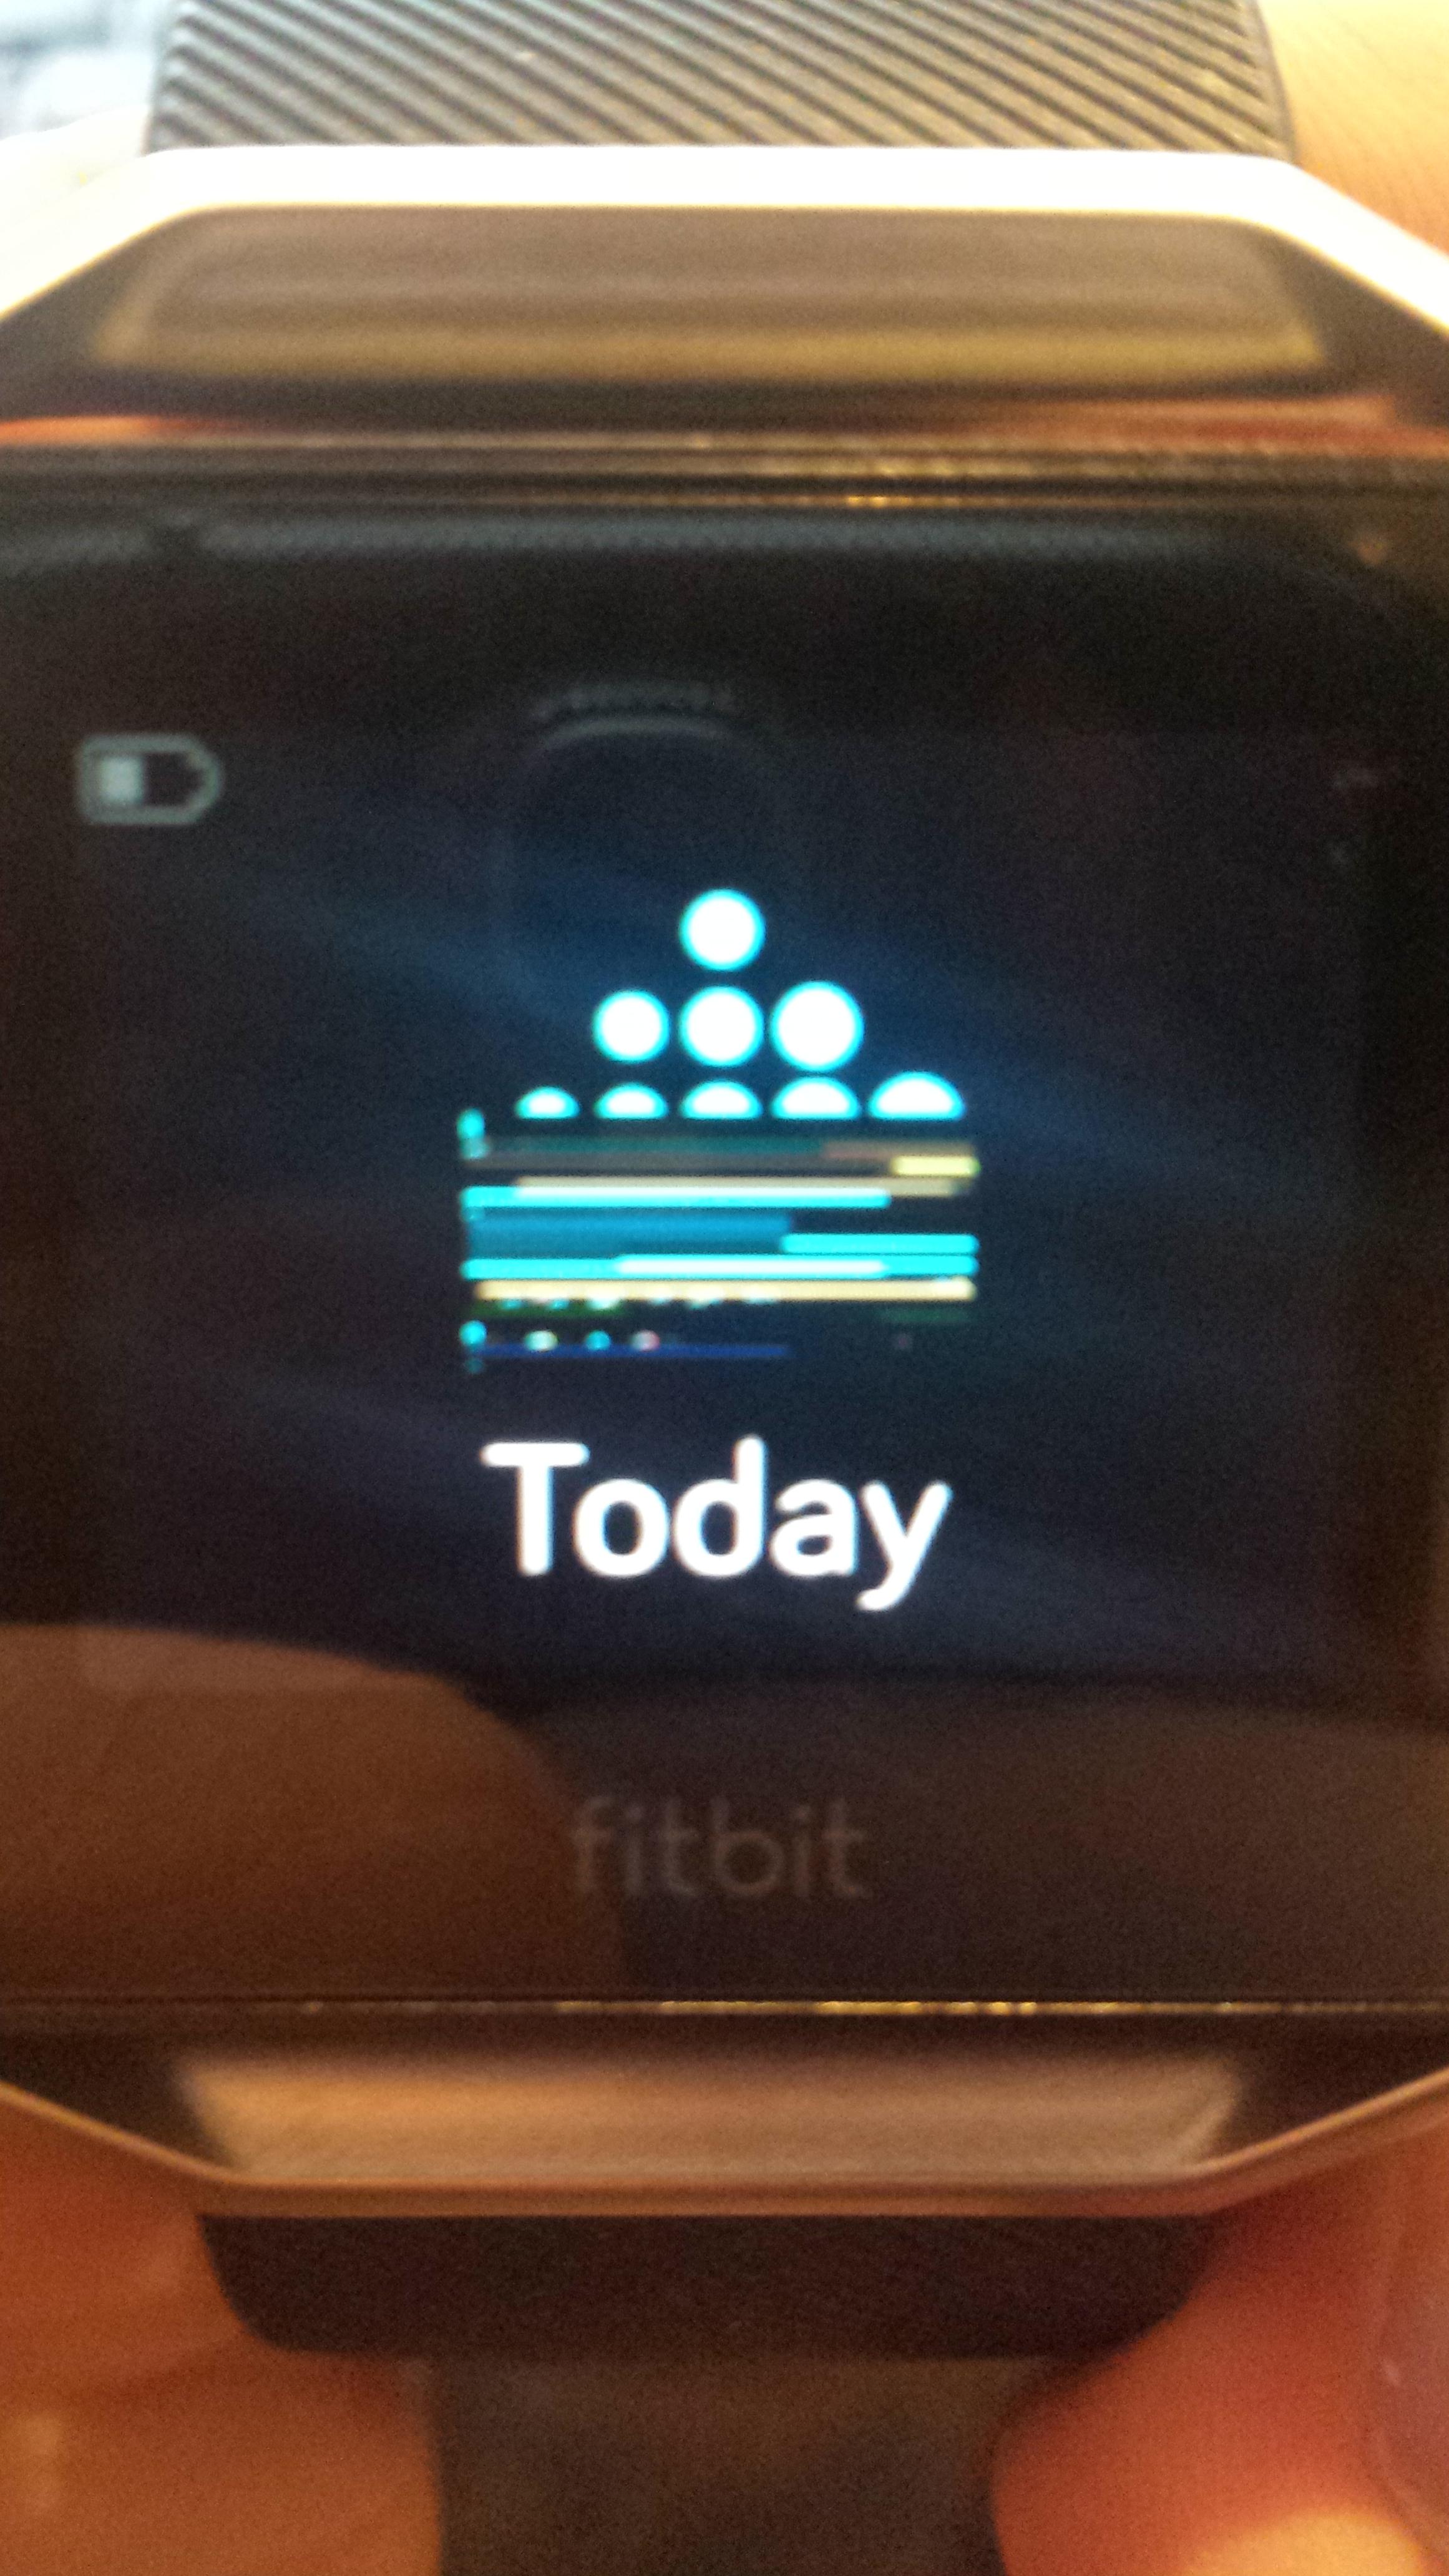 fitbit blaze issues